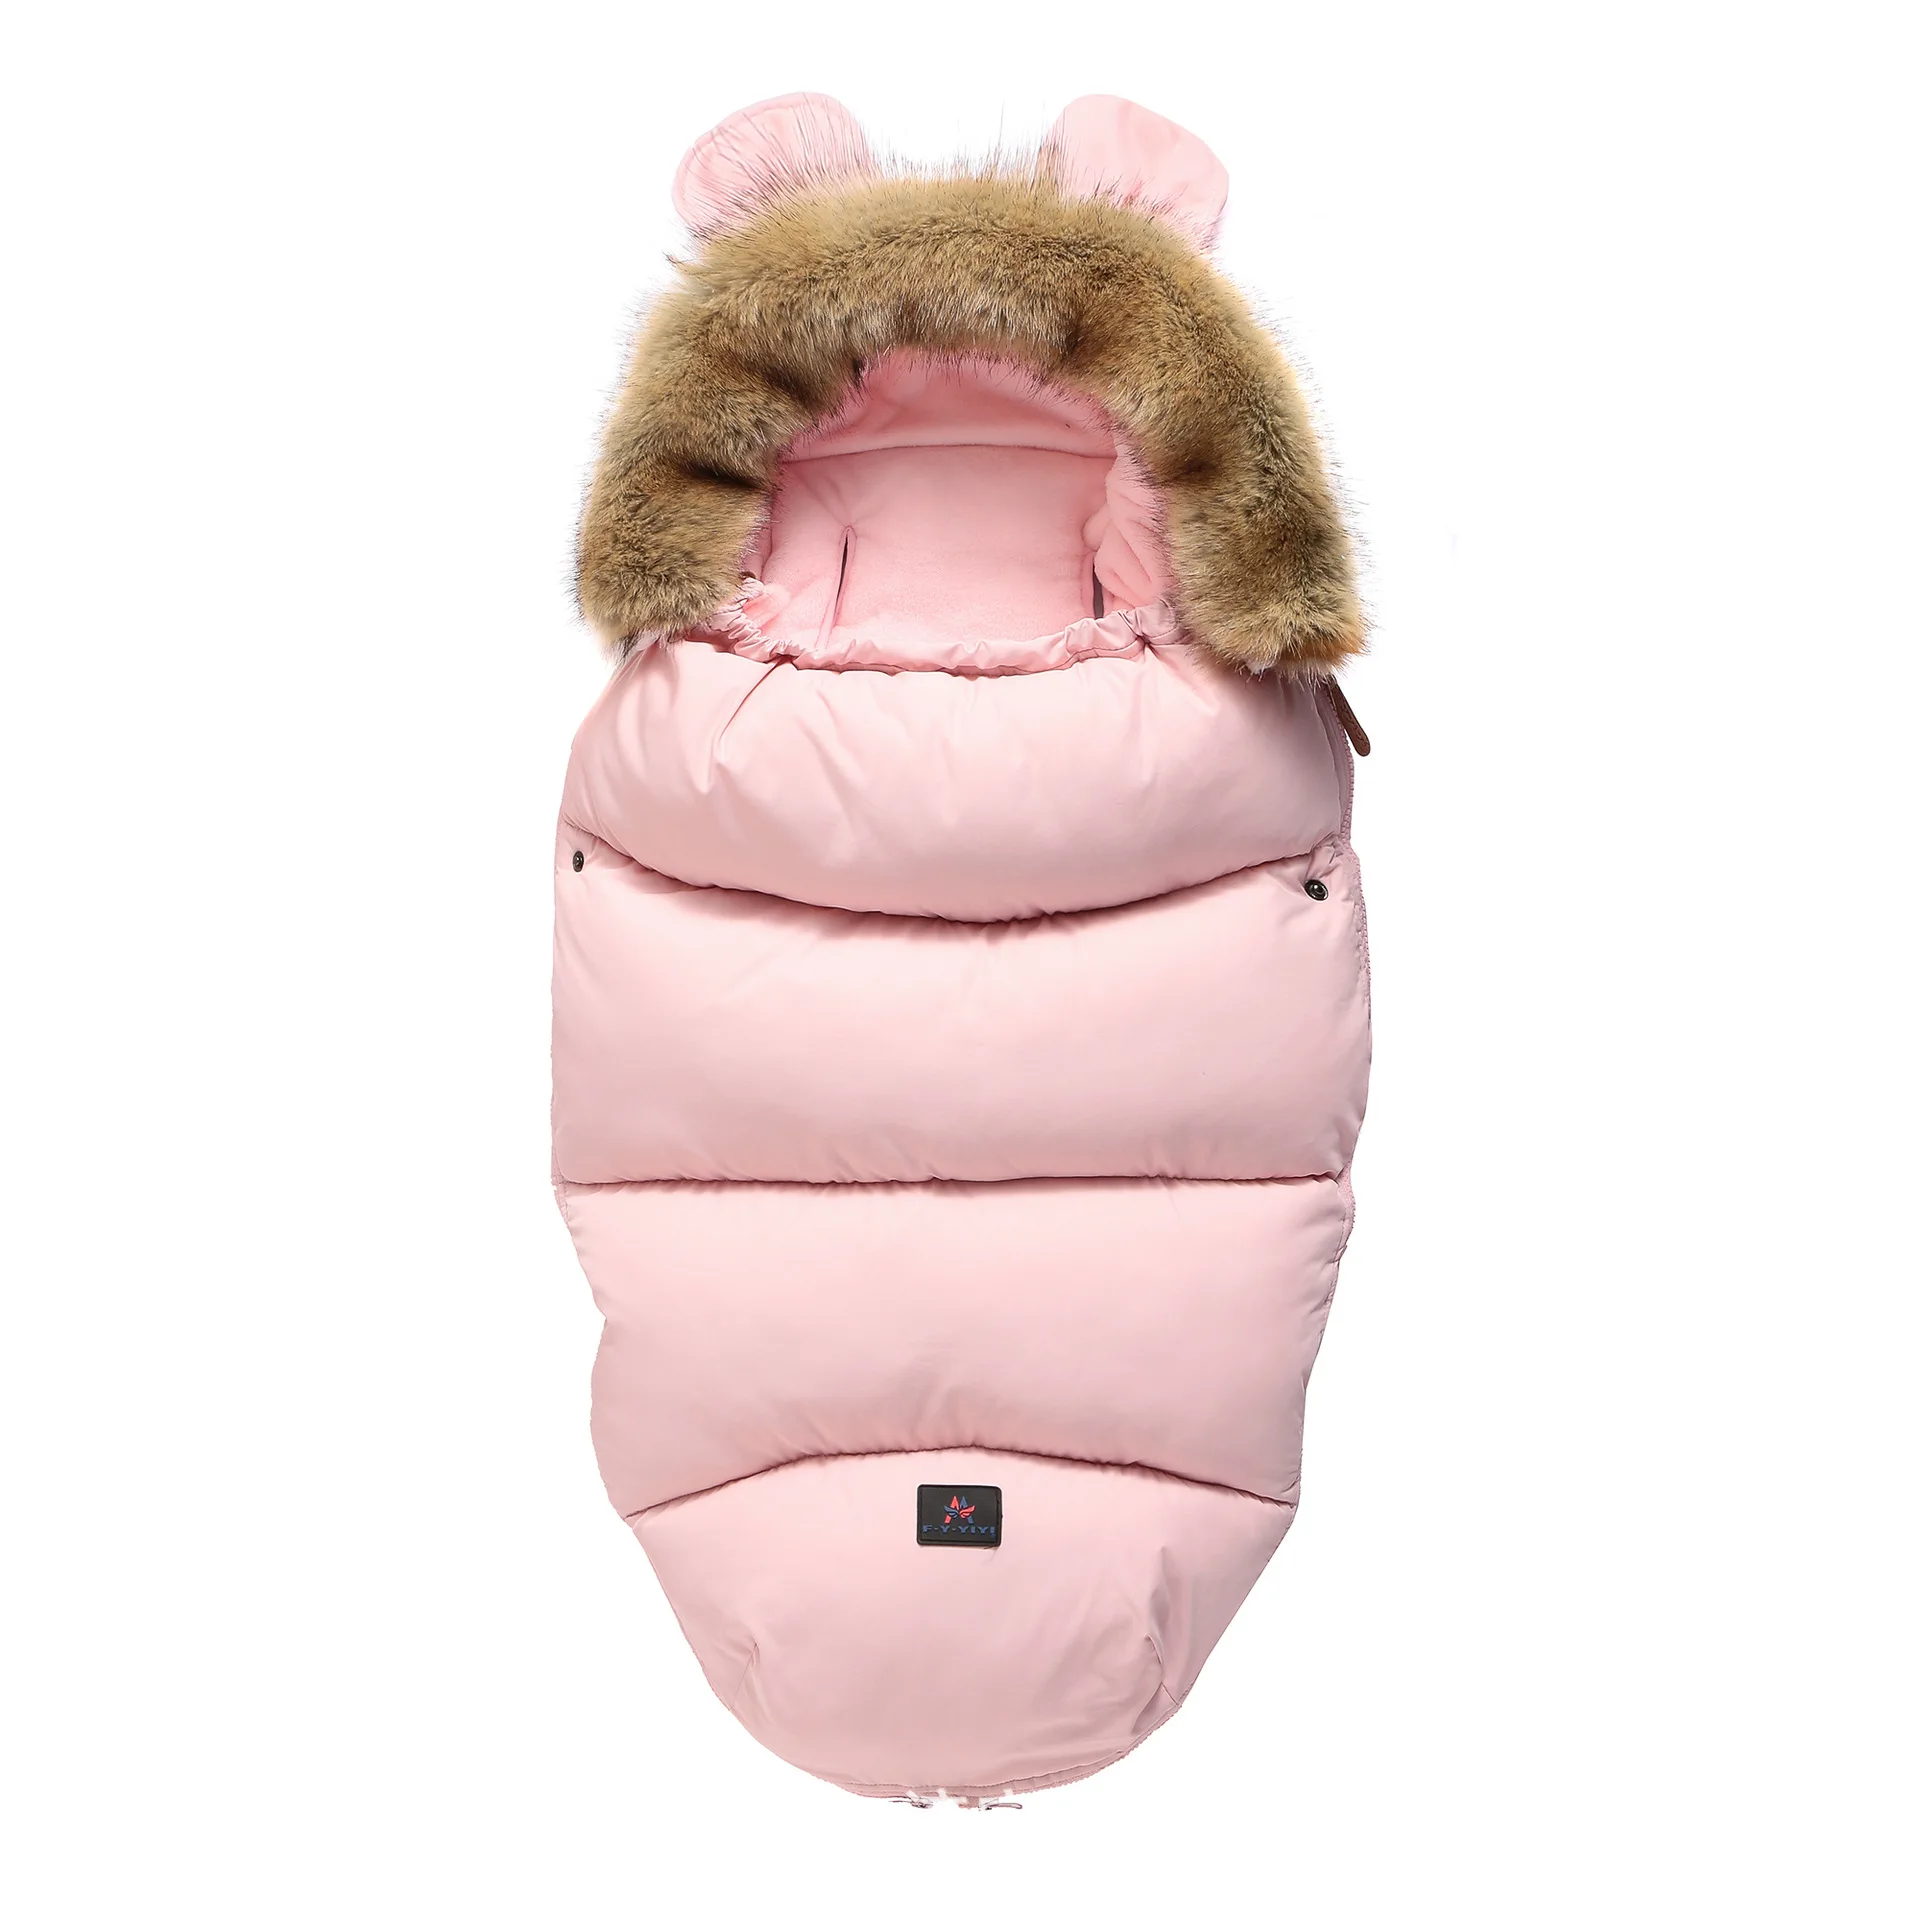 Baby Cocoon Baby Sleeping Bag For Stroller Baby Carriage Sack Pram Warm Winter Changing Diaper Envelope For Newborn